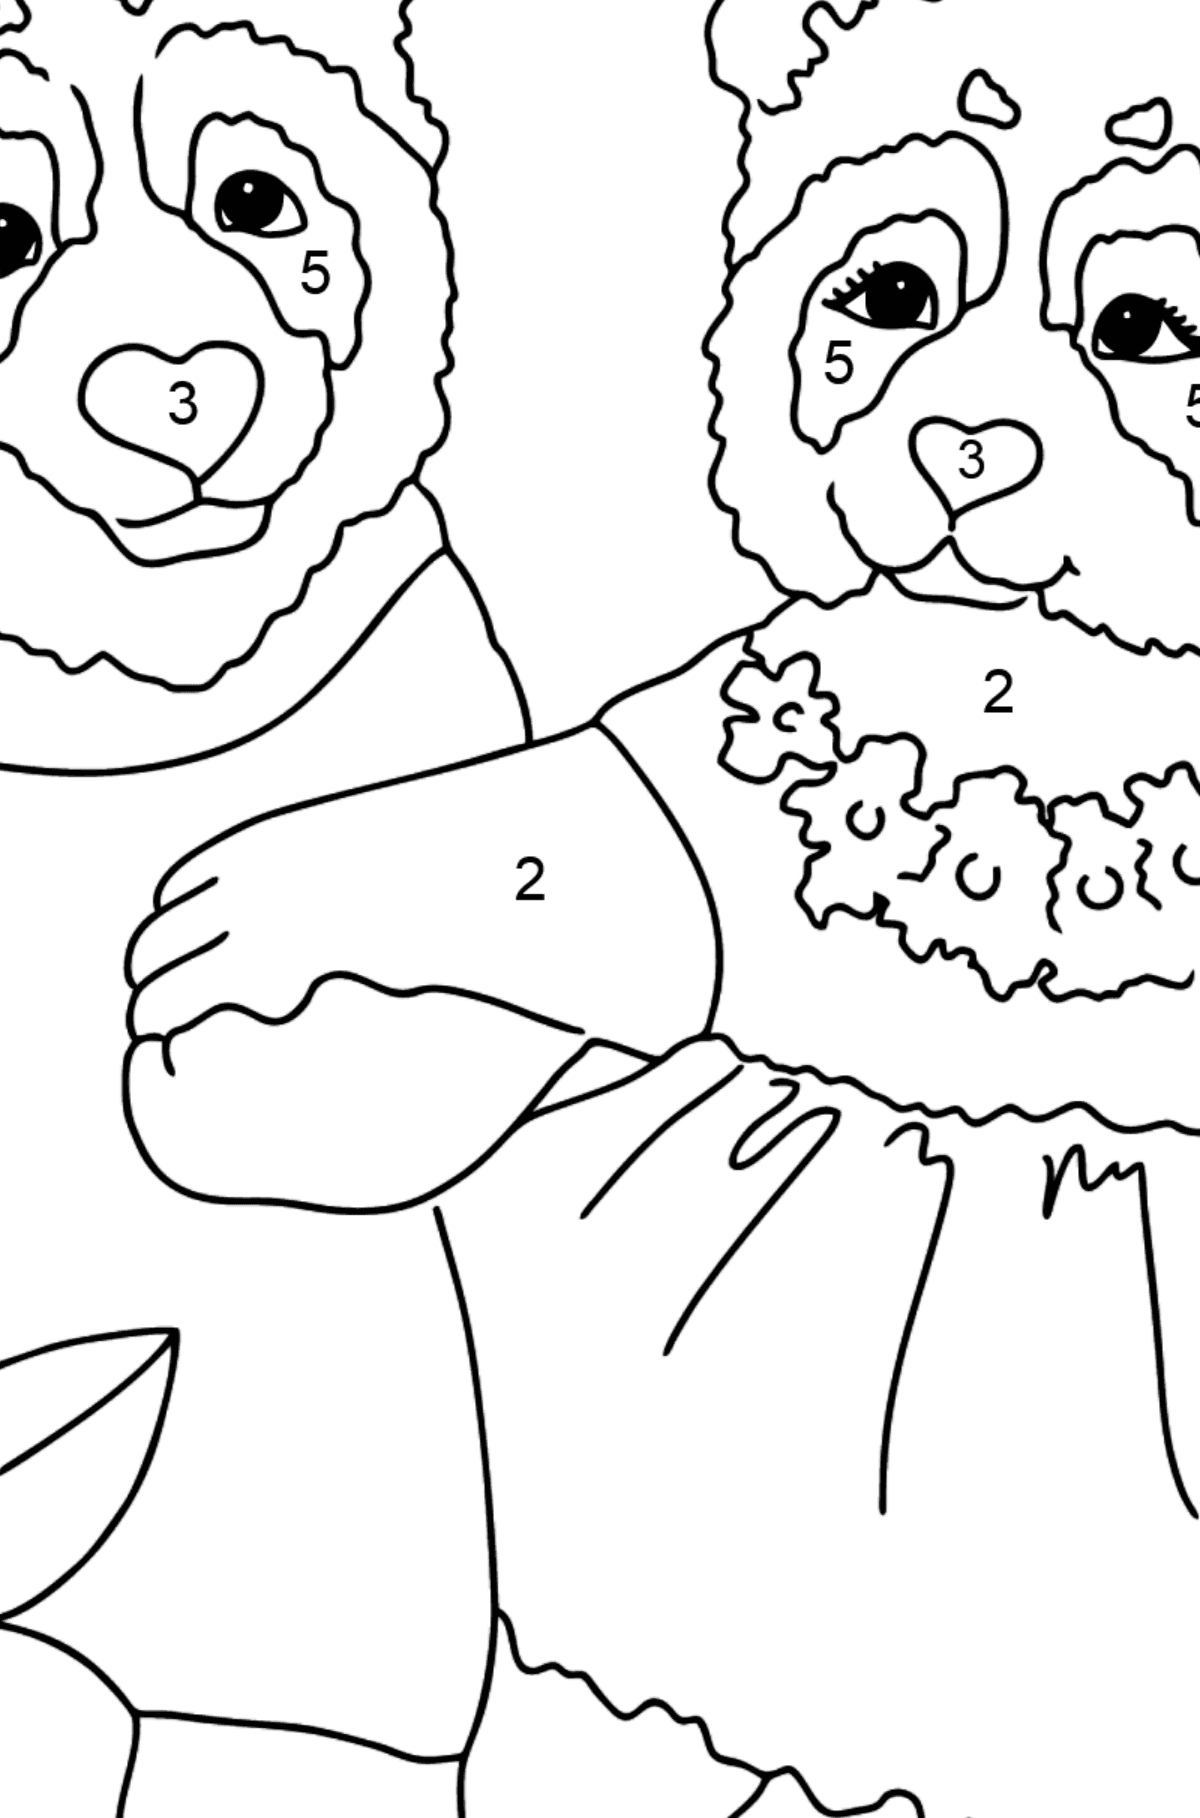 Panda Picture (Simple) coloring page - Coloring by Numbers for Kids